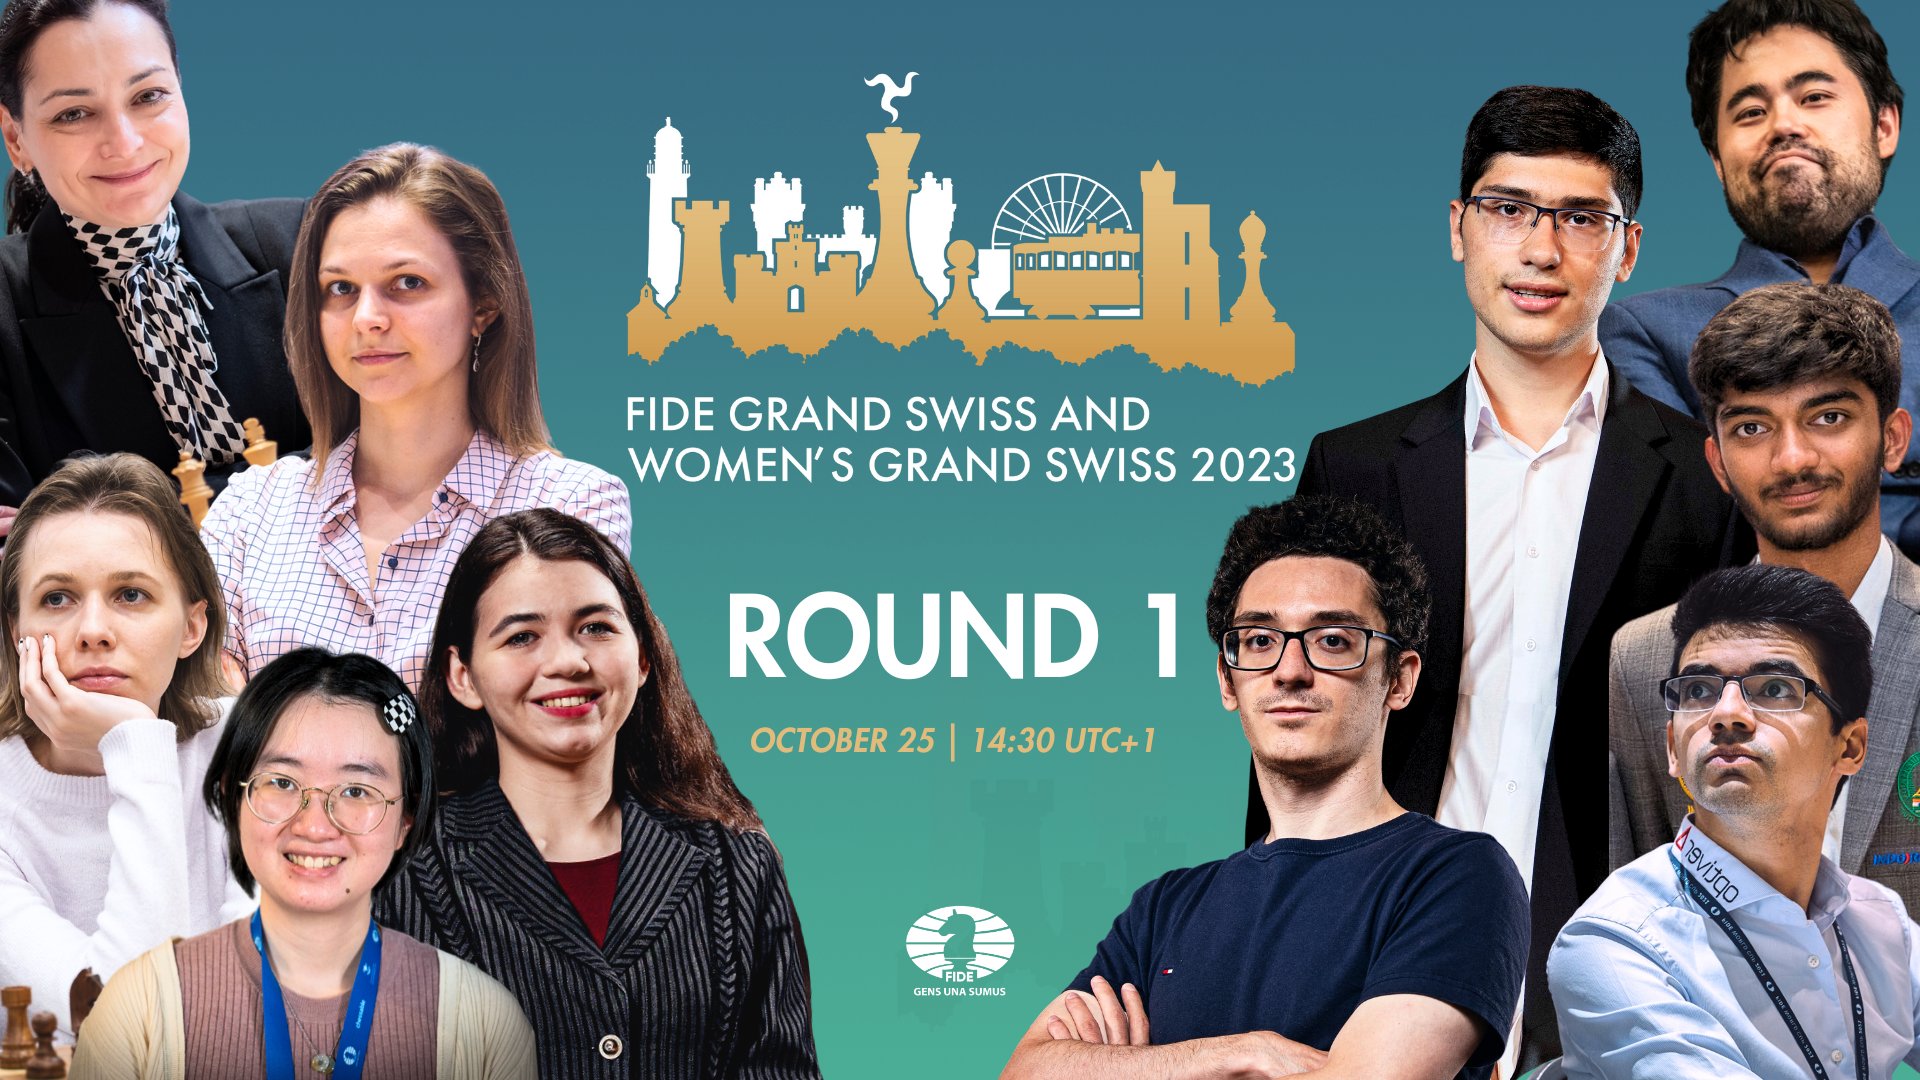 FIDE Grand Swiss 2023 - viewership stats and event details